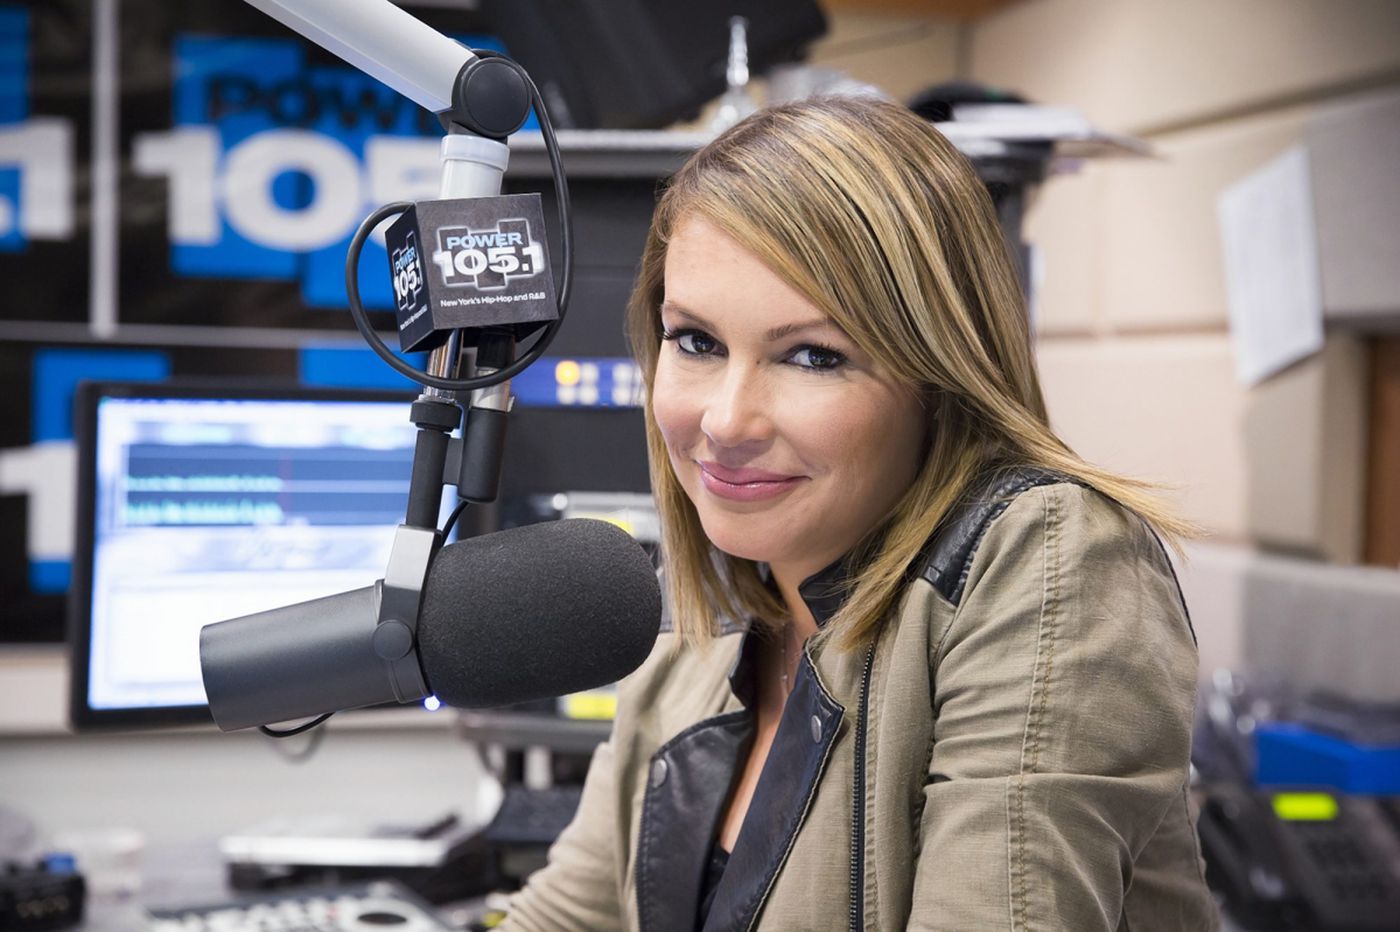 Angie Martinez is Nominated for the National Radio Hall of Fame